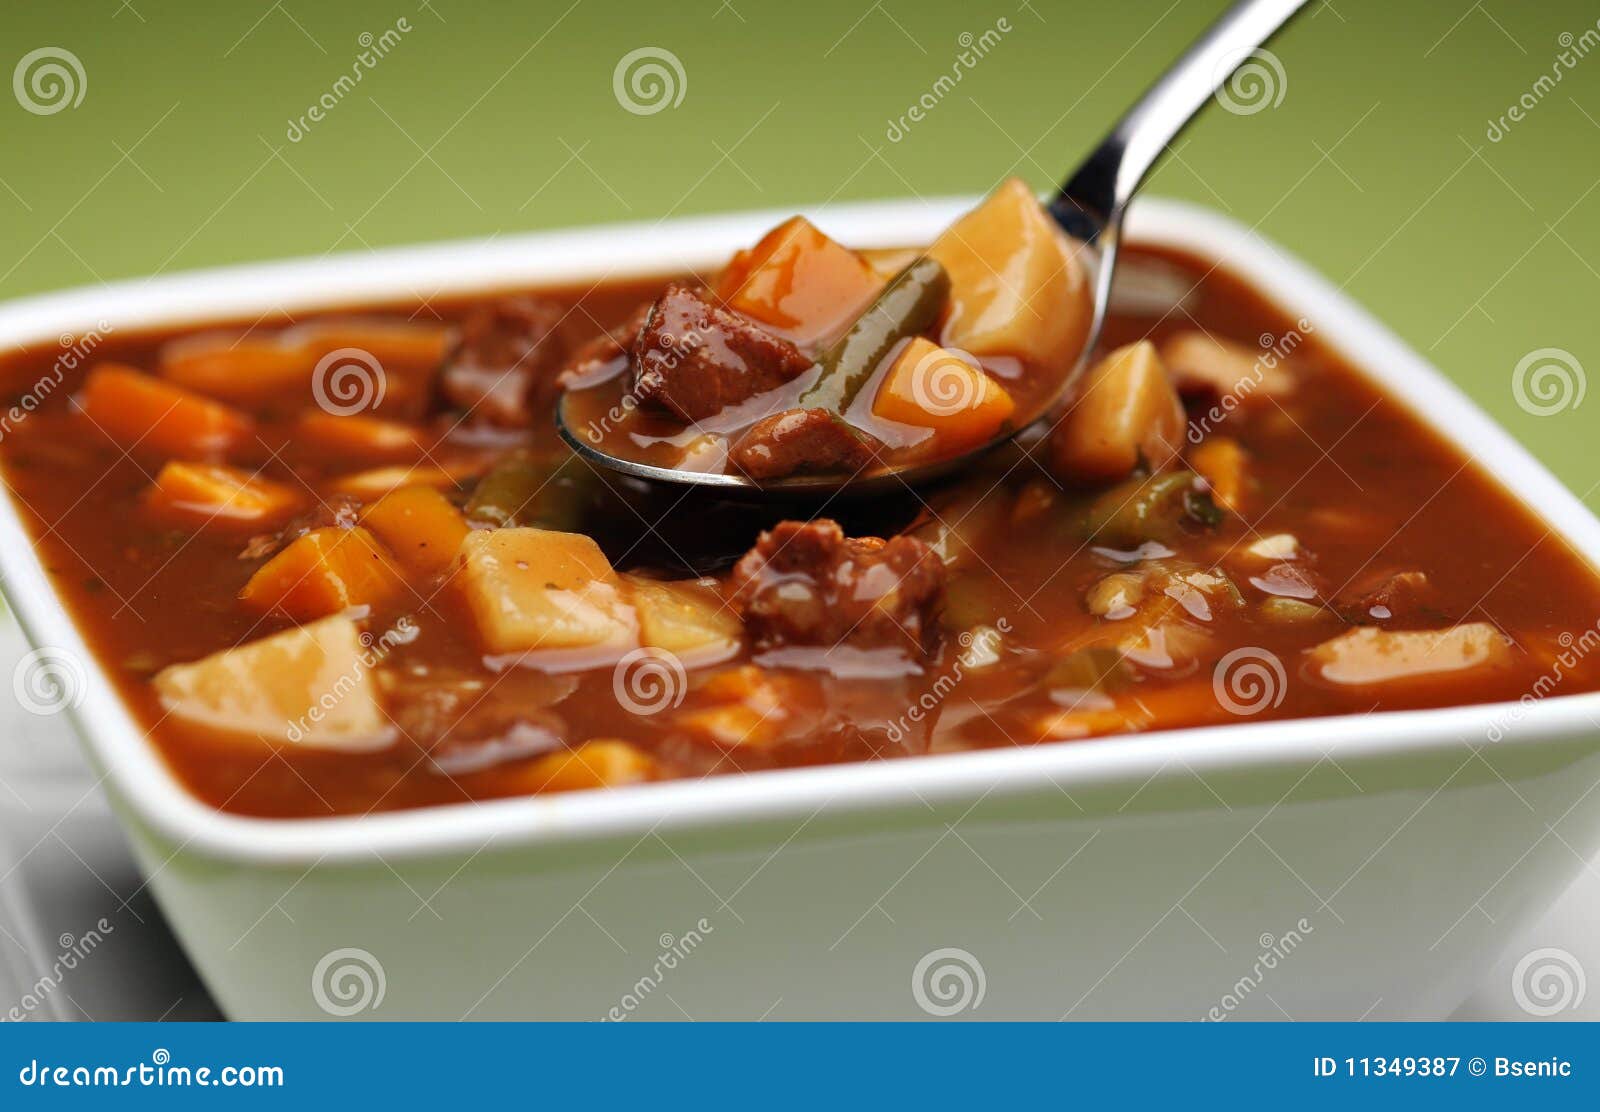 chunky beef and vegetable soup